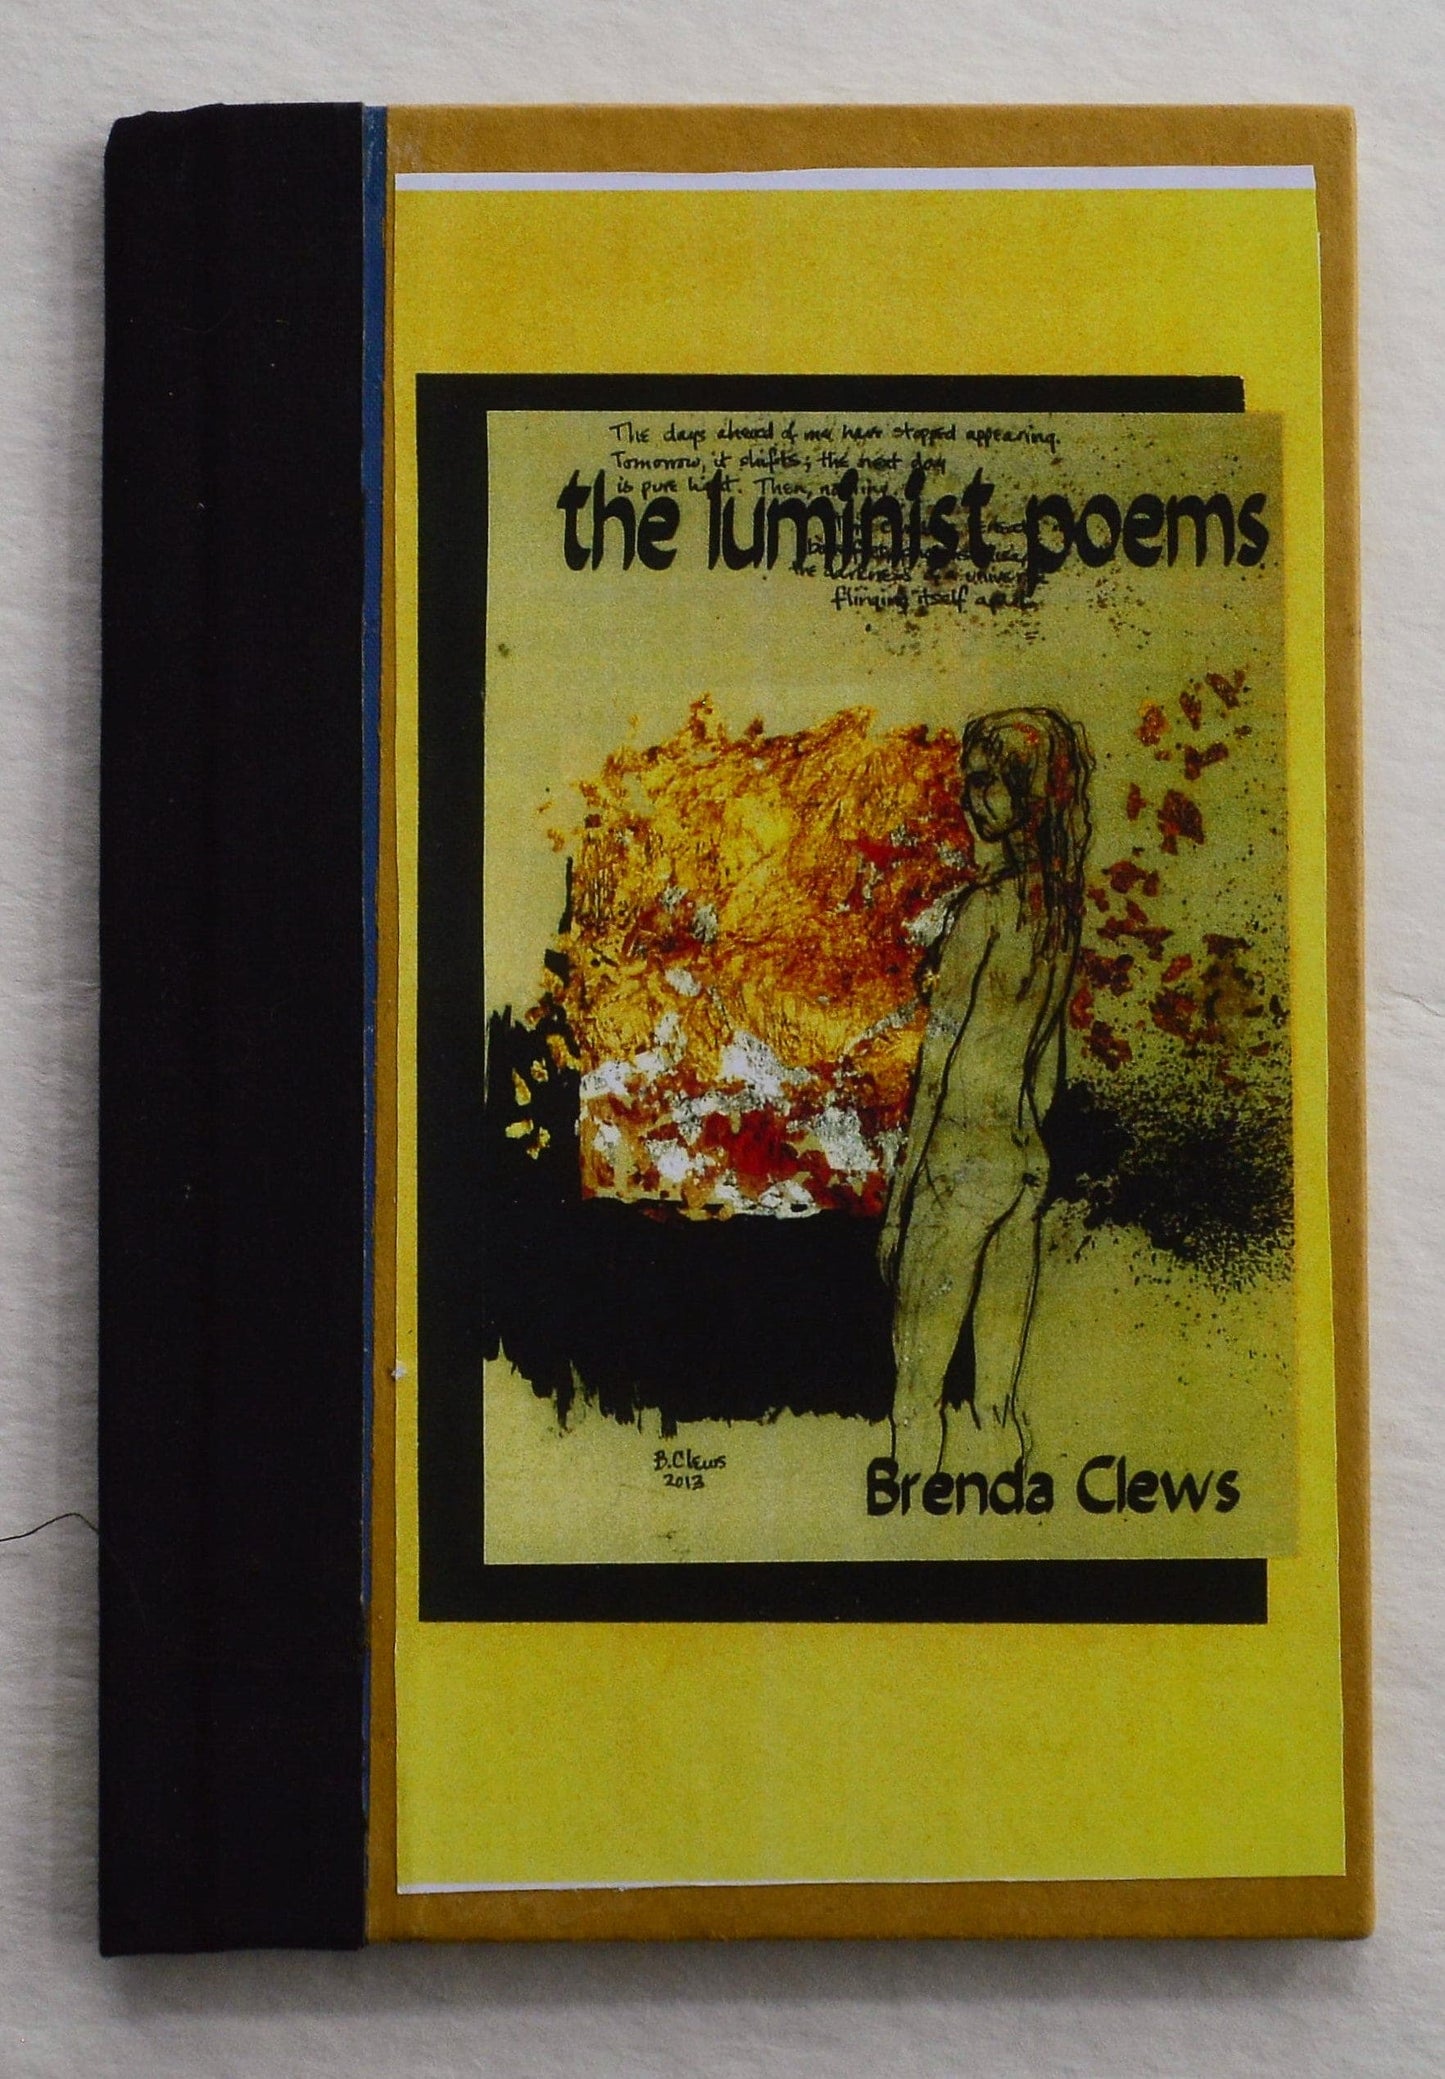 The Luminist Poems - Brenda Clews